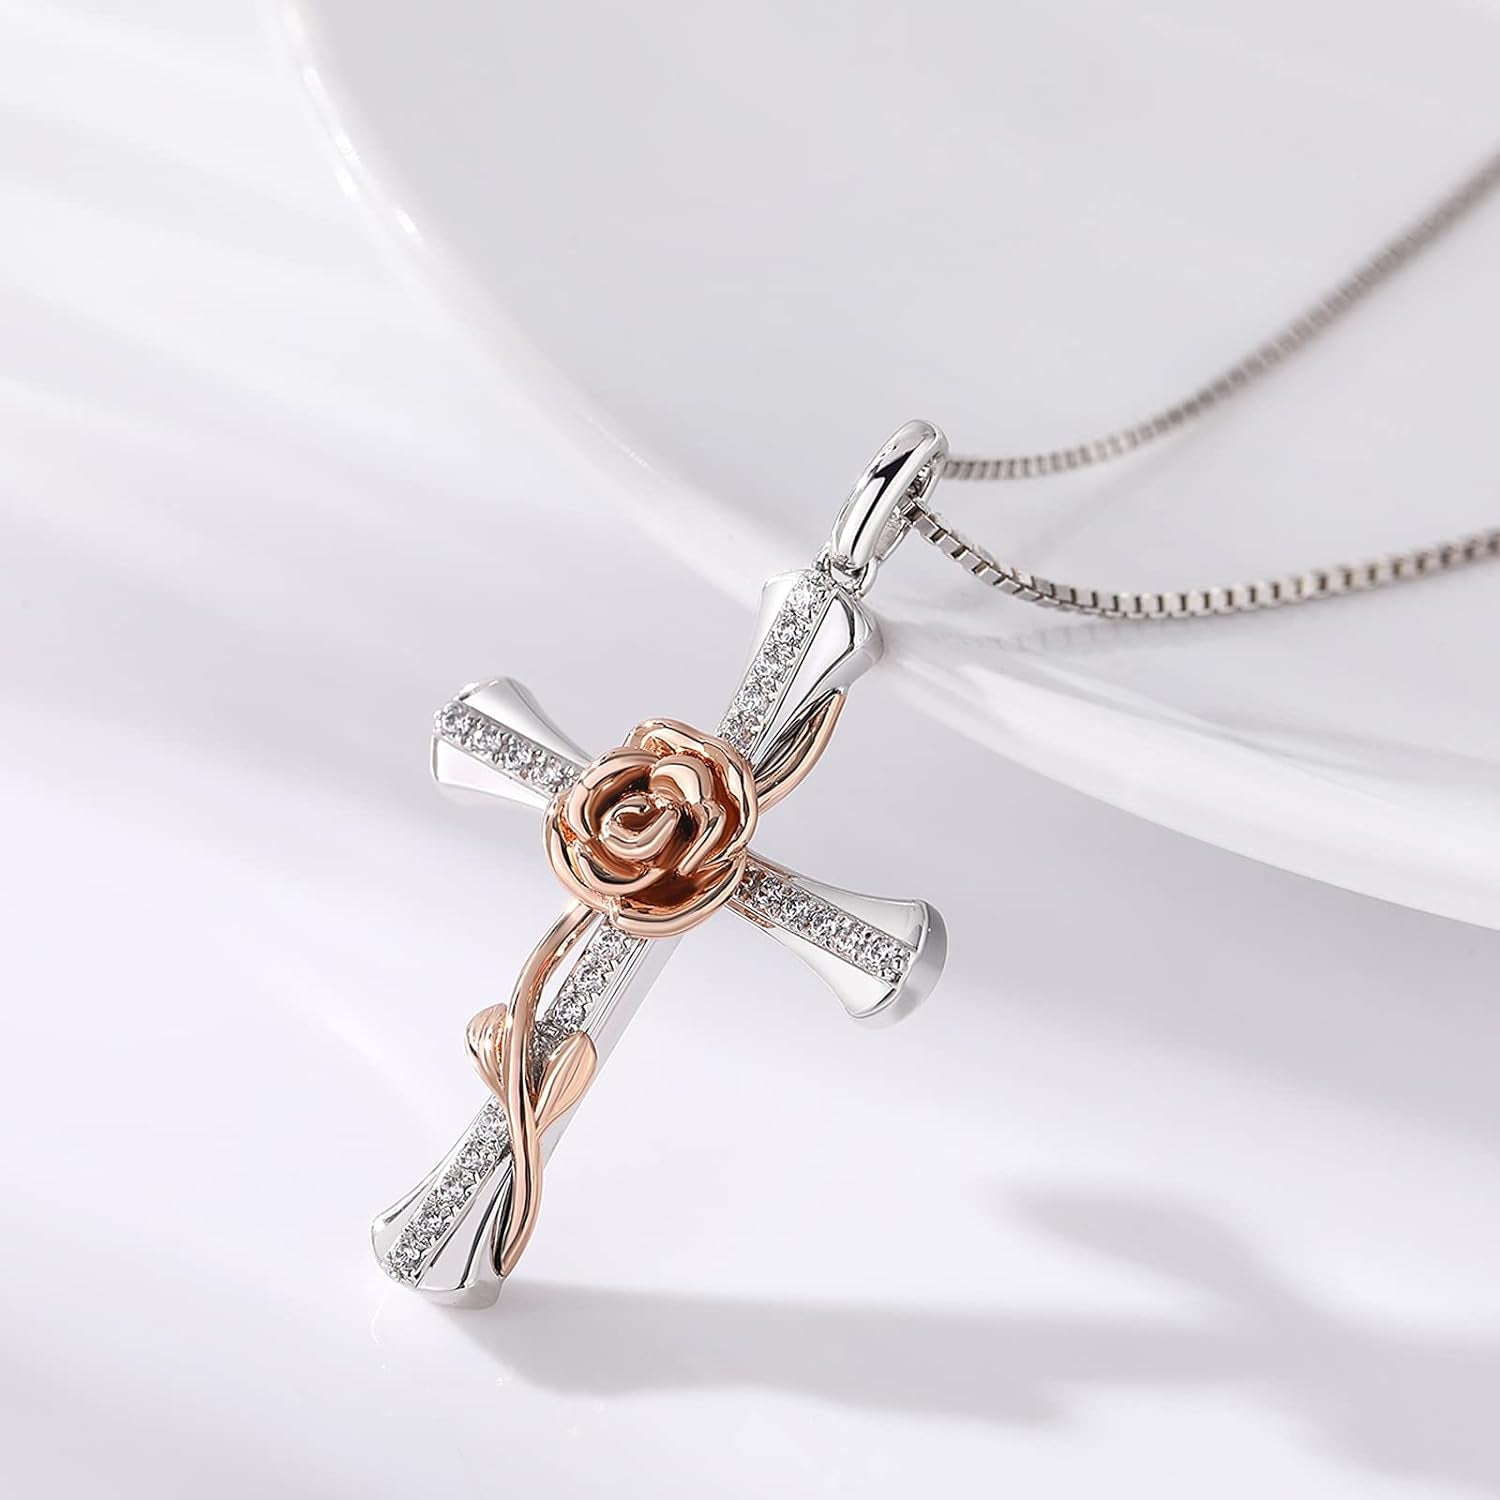 Rose Cross Necklace for Women 925 Sterling Silver Infinity Cross Pendant with Birthstone Cubic Zirconia, Cross Jewelry Gift for Women Mom Girlfriend, with Gift Box